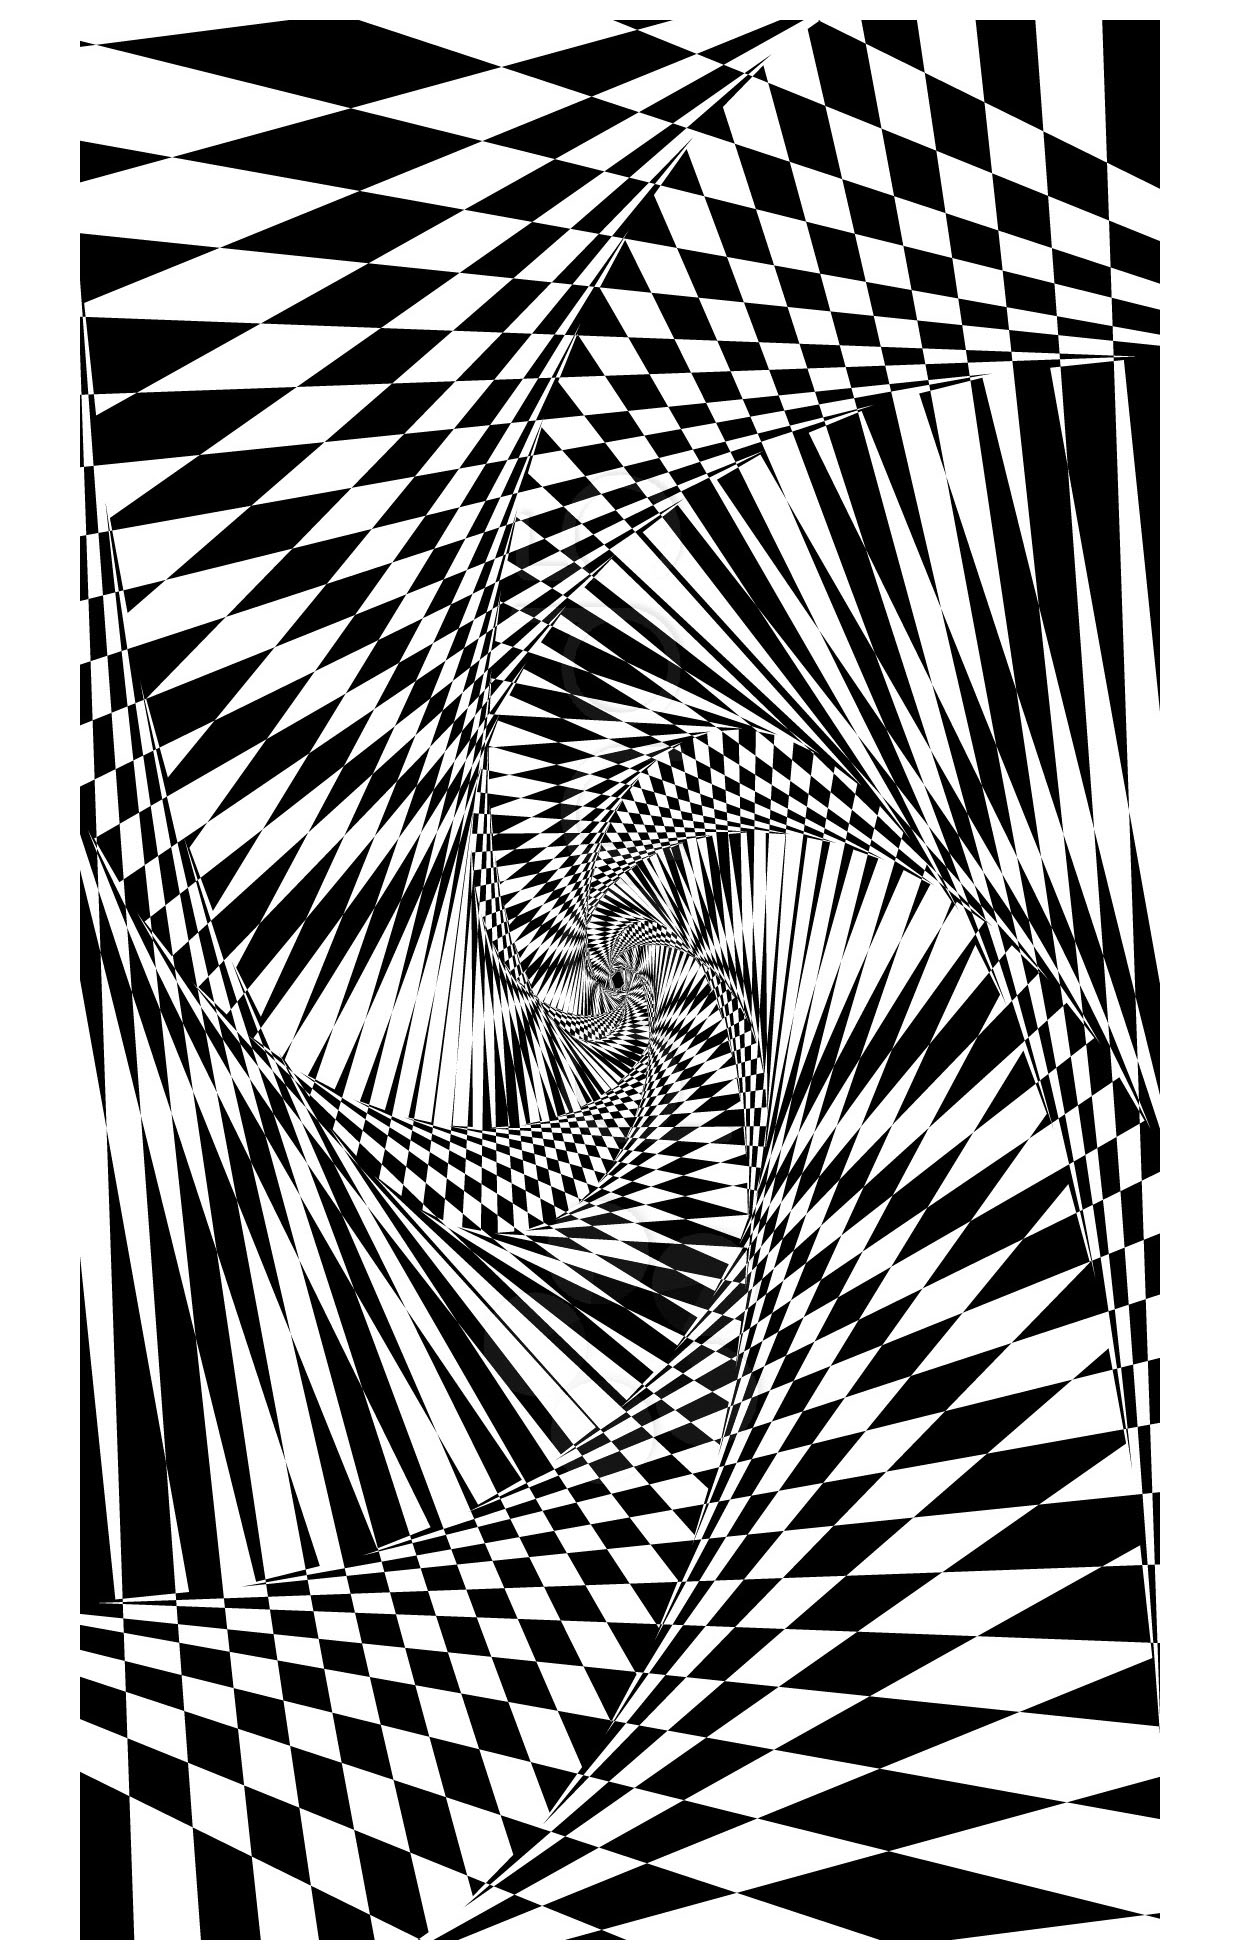 Psychedelic 1bis - Psychedelic Adult Coloring Pages